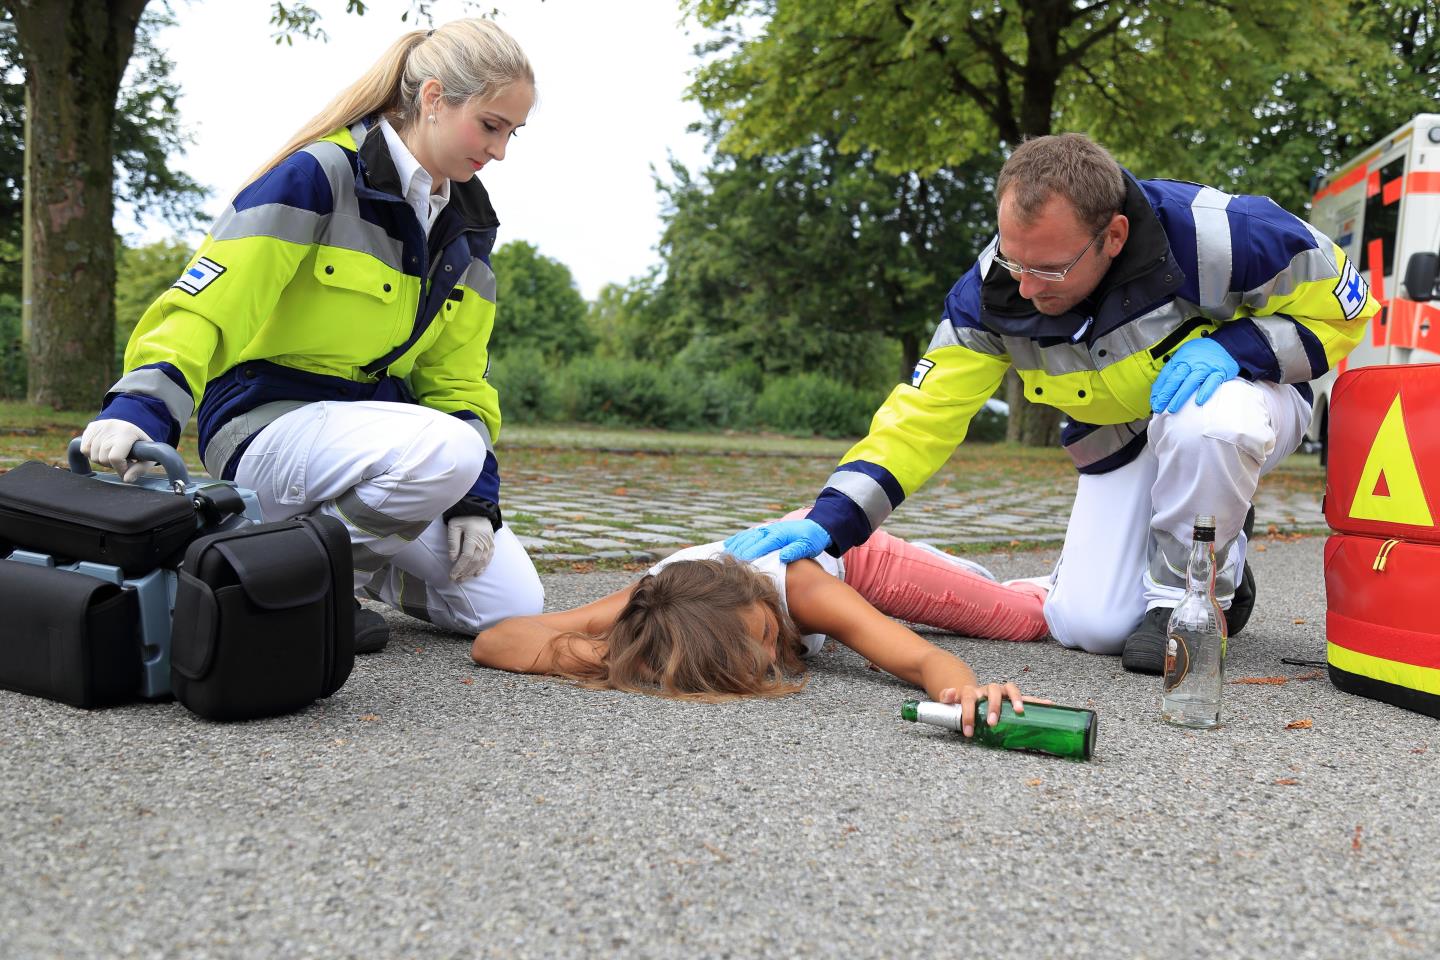 Two paramedics tending to a drunk woman collapsed on the ground with a bottle of alcohol in her hand